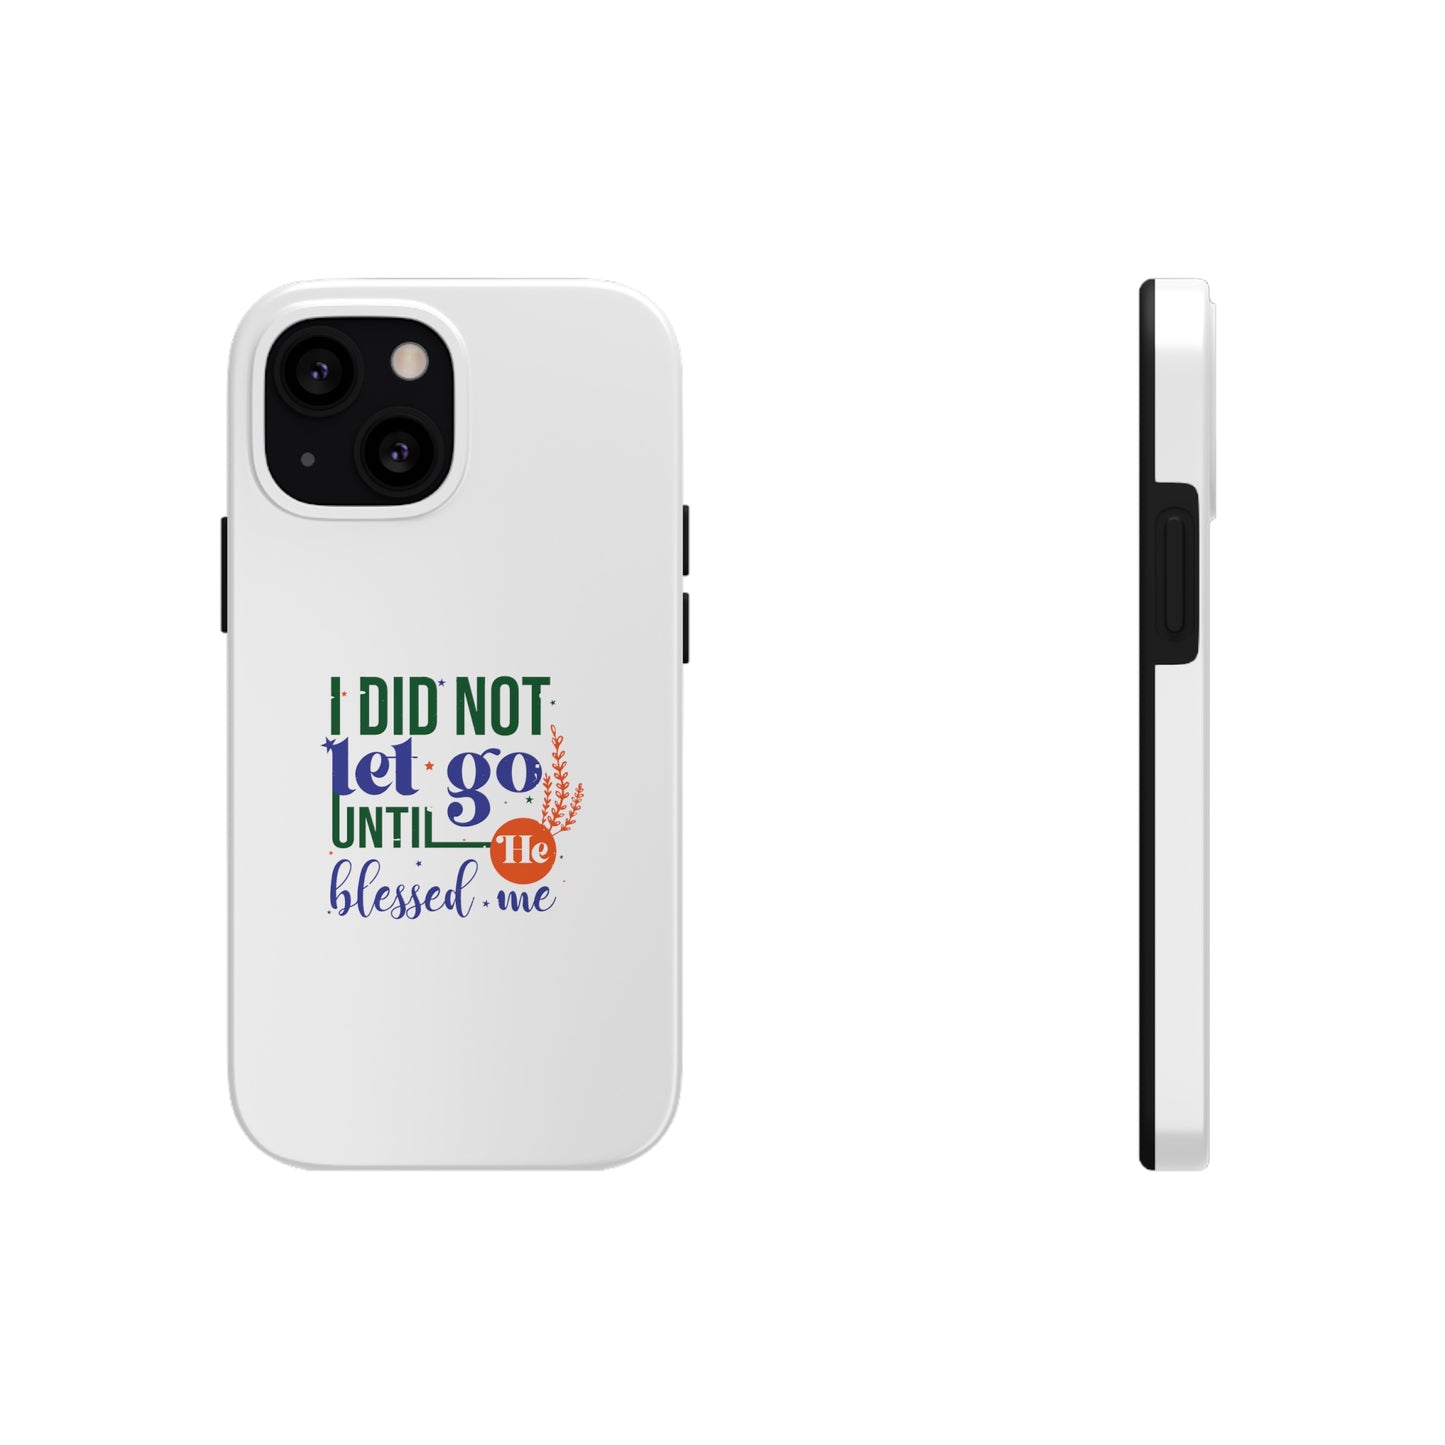 I Did Not Let Go Until He Blessed Me Tough Phone Cases, Case-Mate